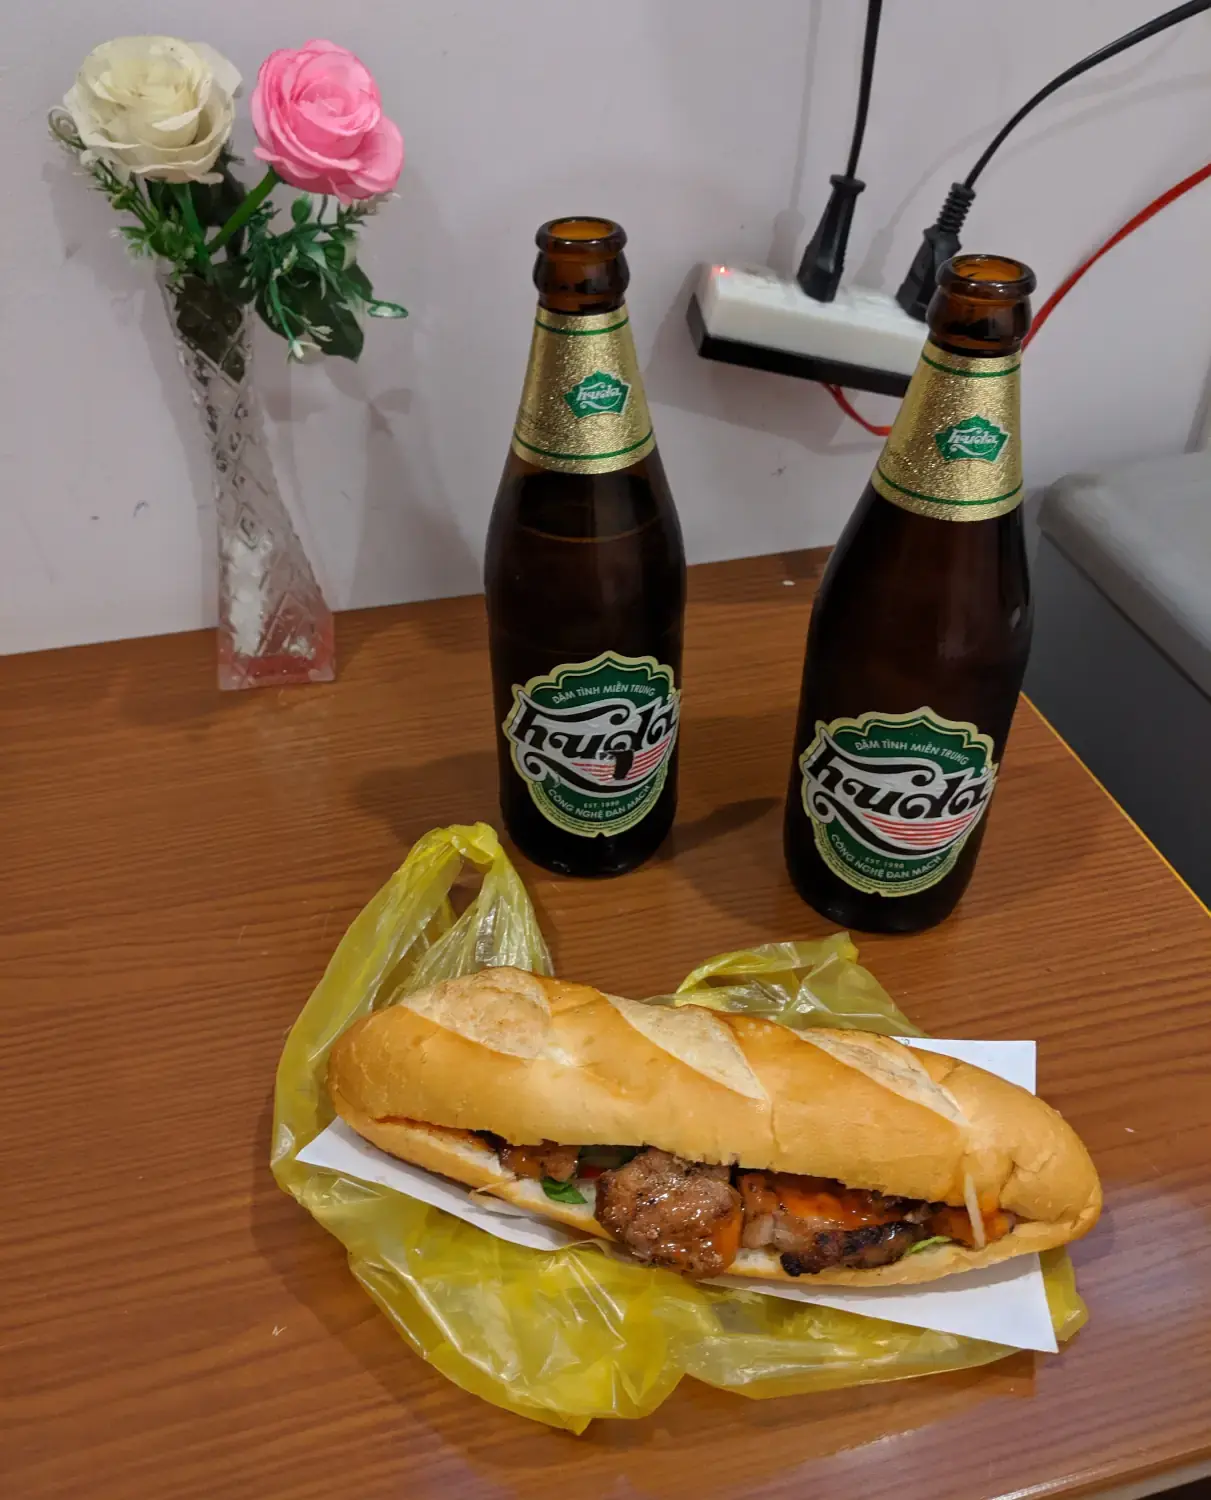 BBQ Pork Banh mi and some beer